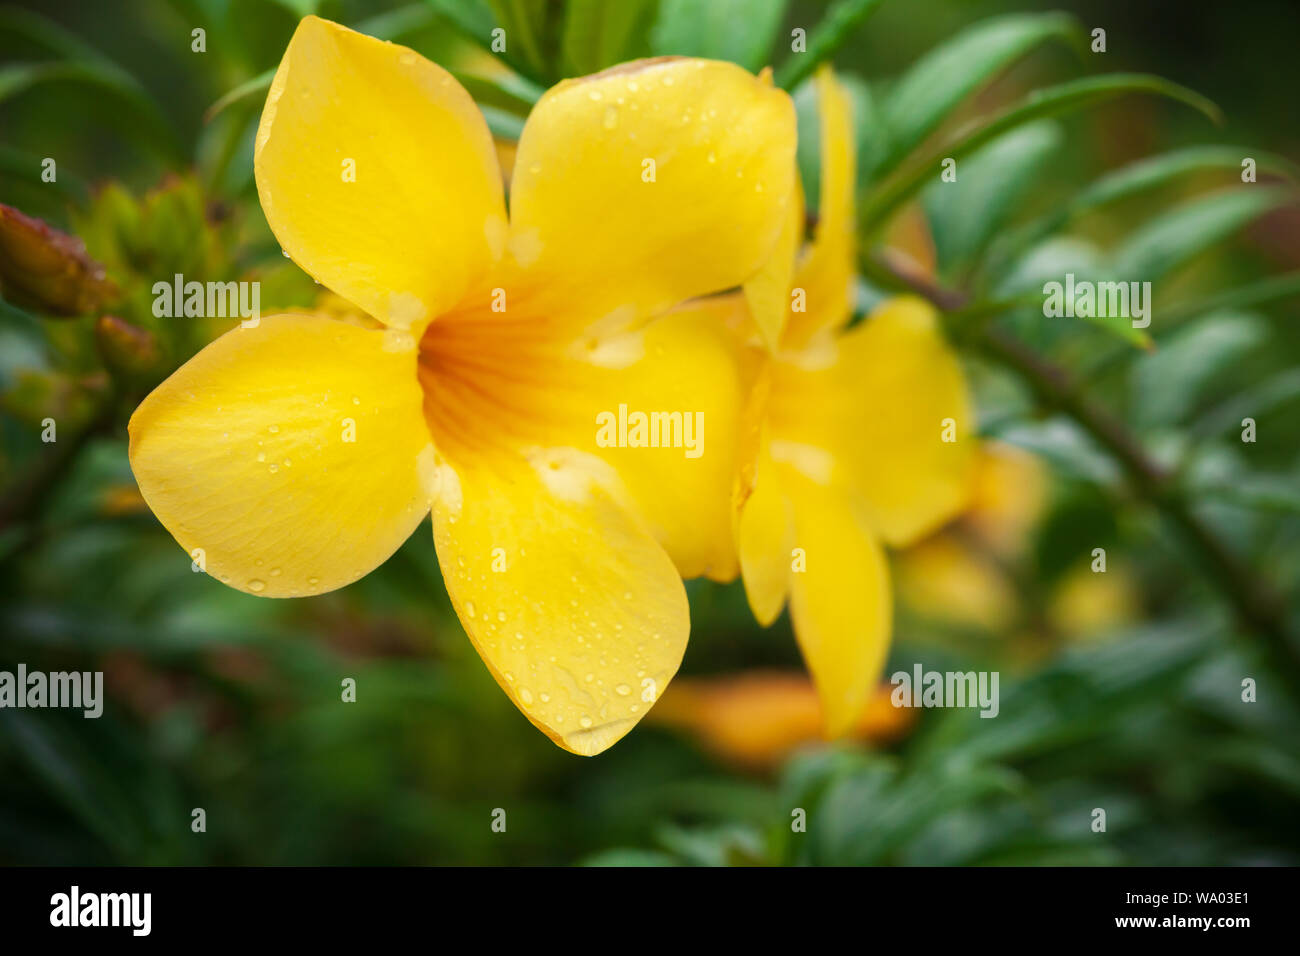 Allamanda yellow flowers, it is a genus of flowering plants in the dogbane family, Apocynaceae. Close-up background photo with selective focus taken i Stock Photo